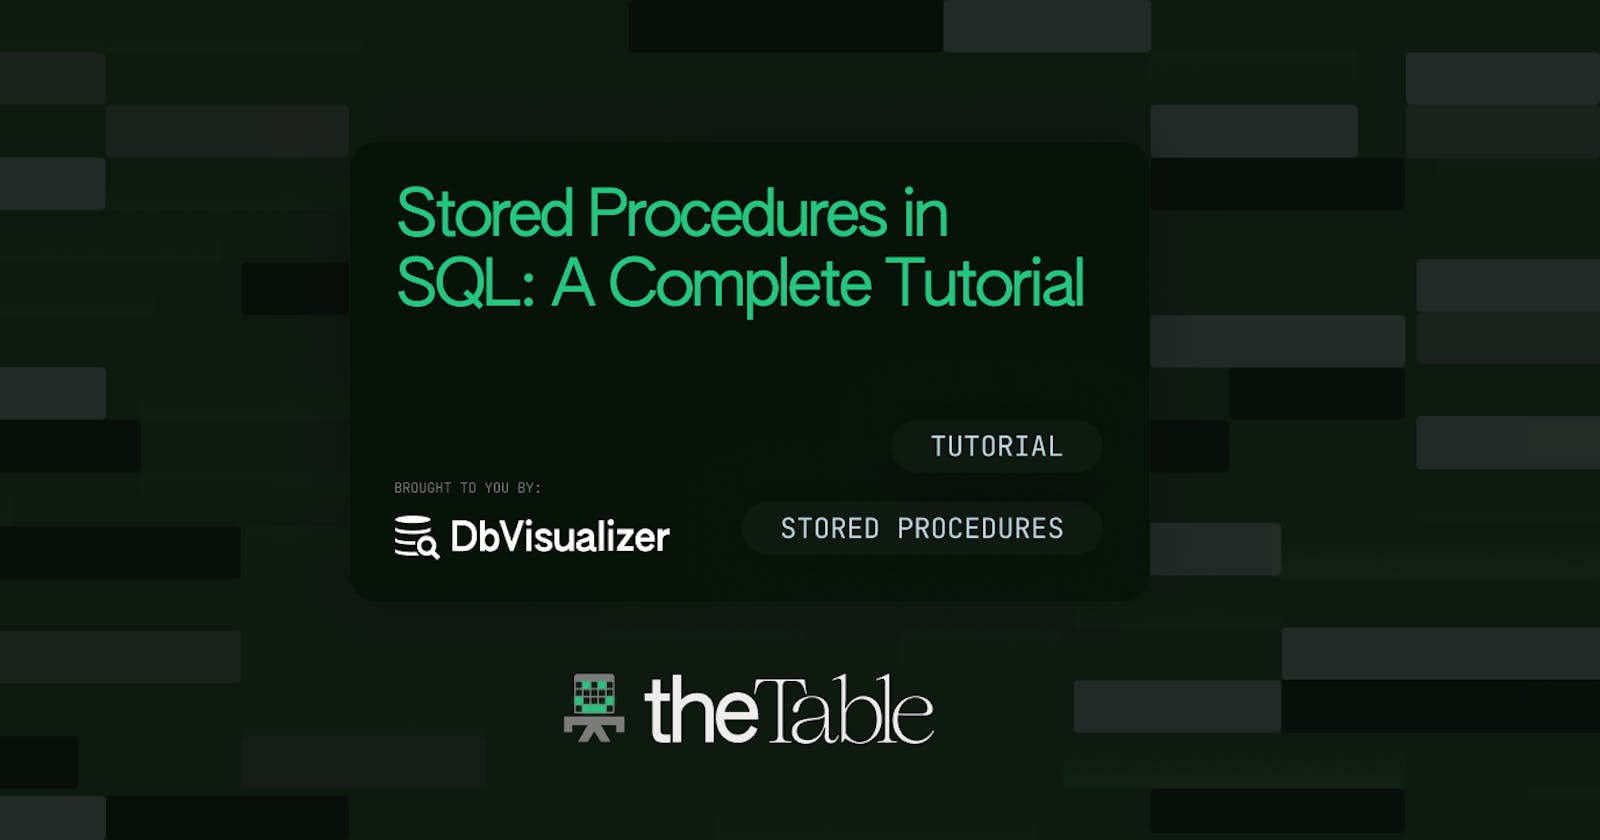 Stored Procedures in SQL: A Complete Tutorial